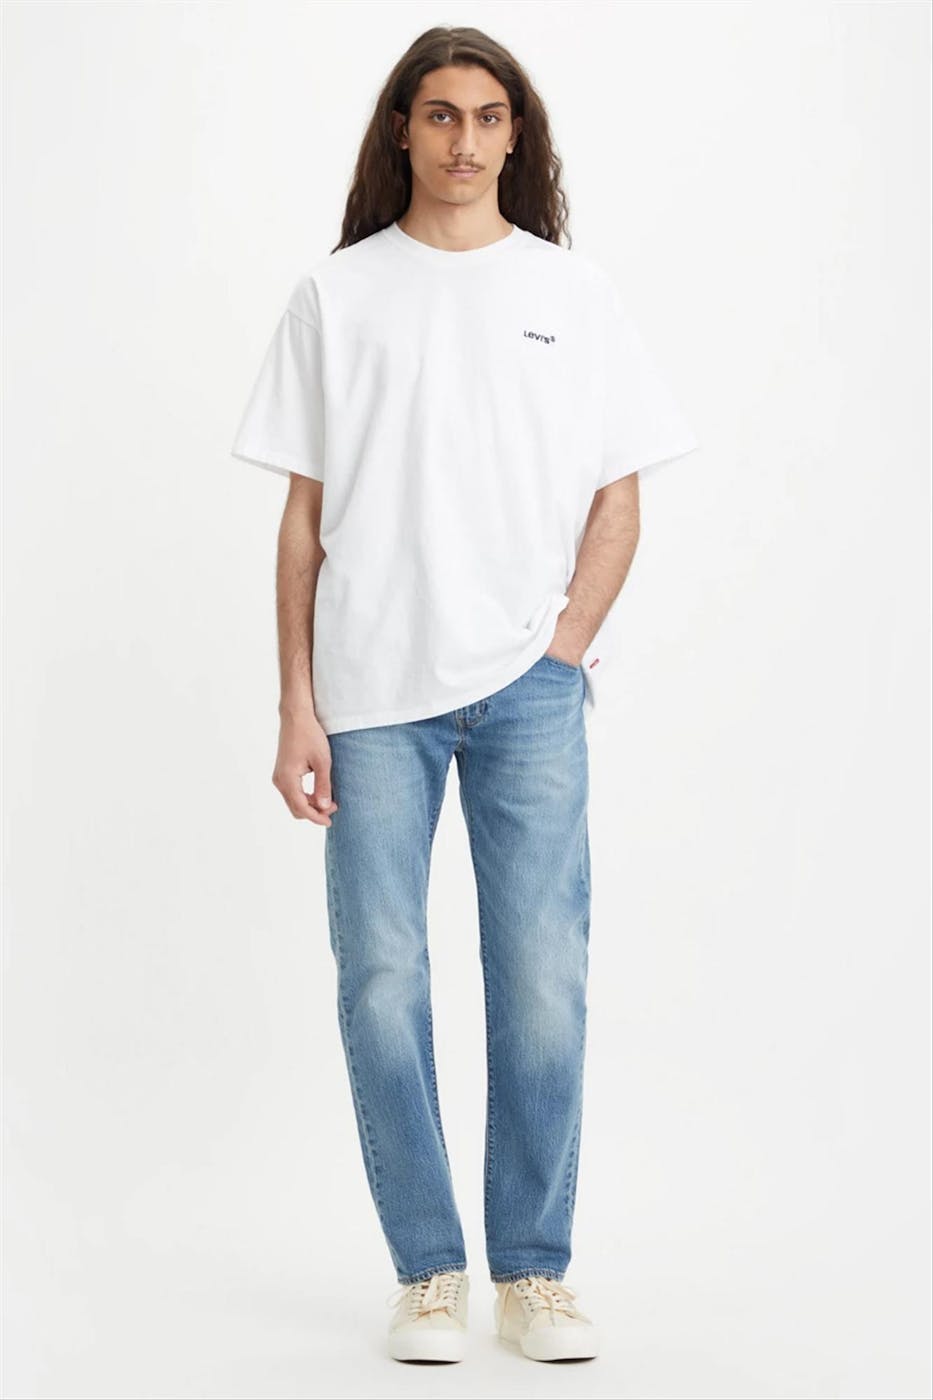 Levi's - Lichtblauwe 502 Tapered jeans